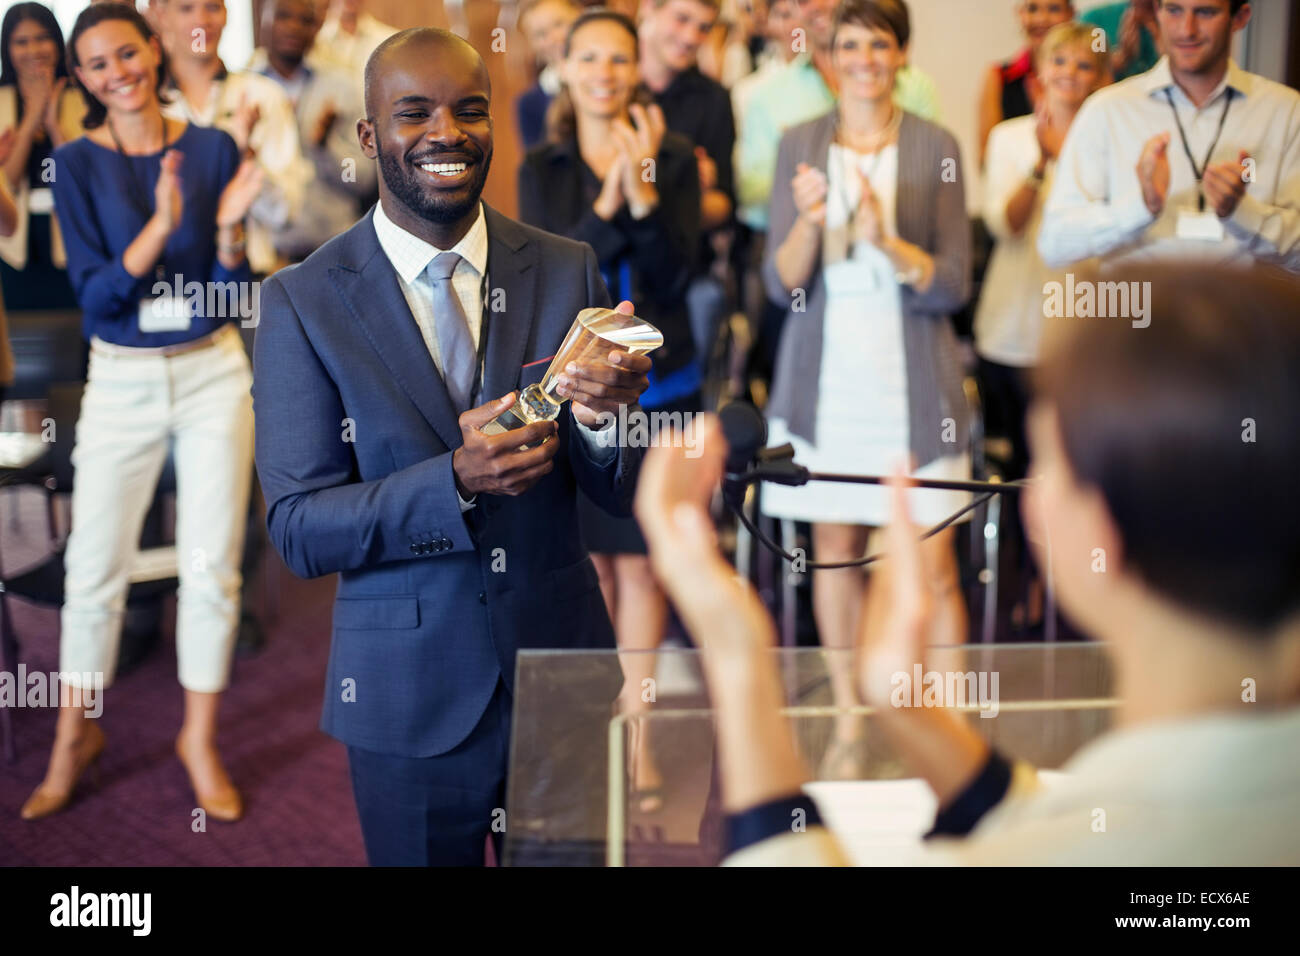 Portrait of young man holding trophy, standing in conference room, smiling to applauding audience Stock Photo